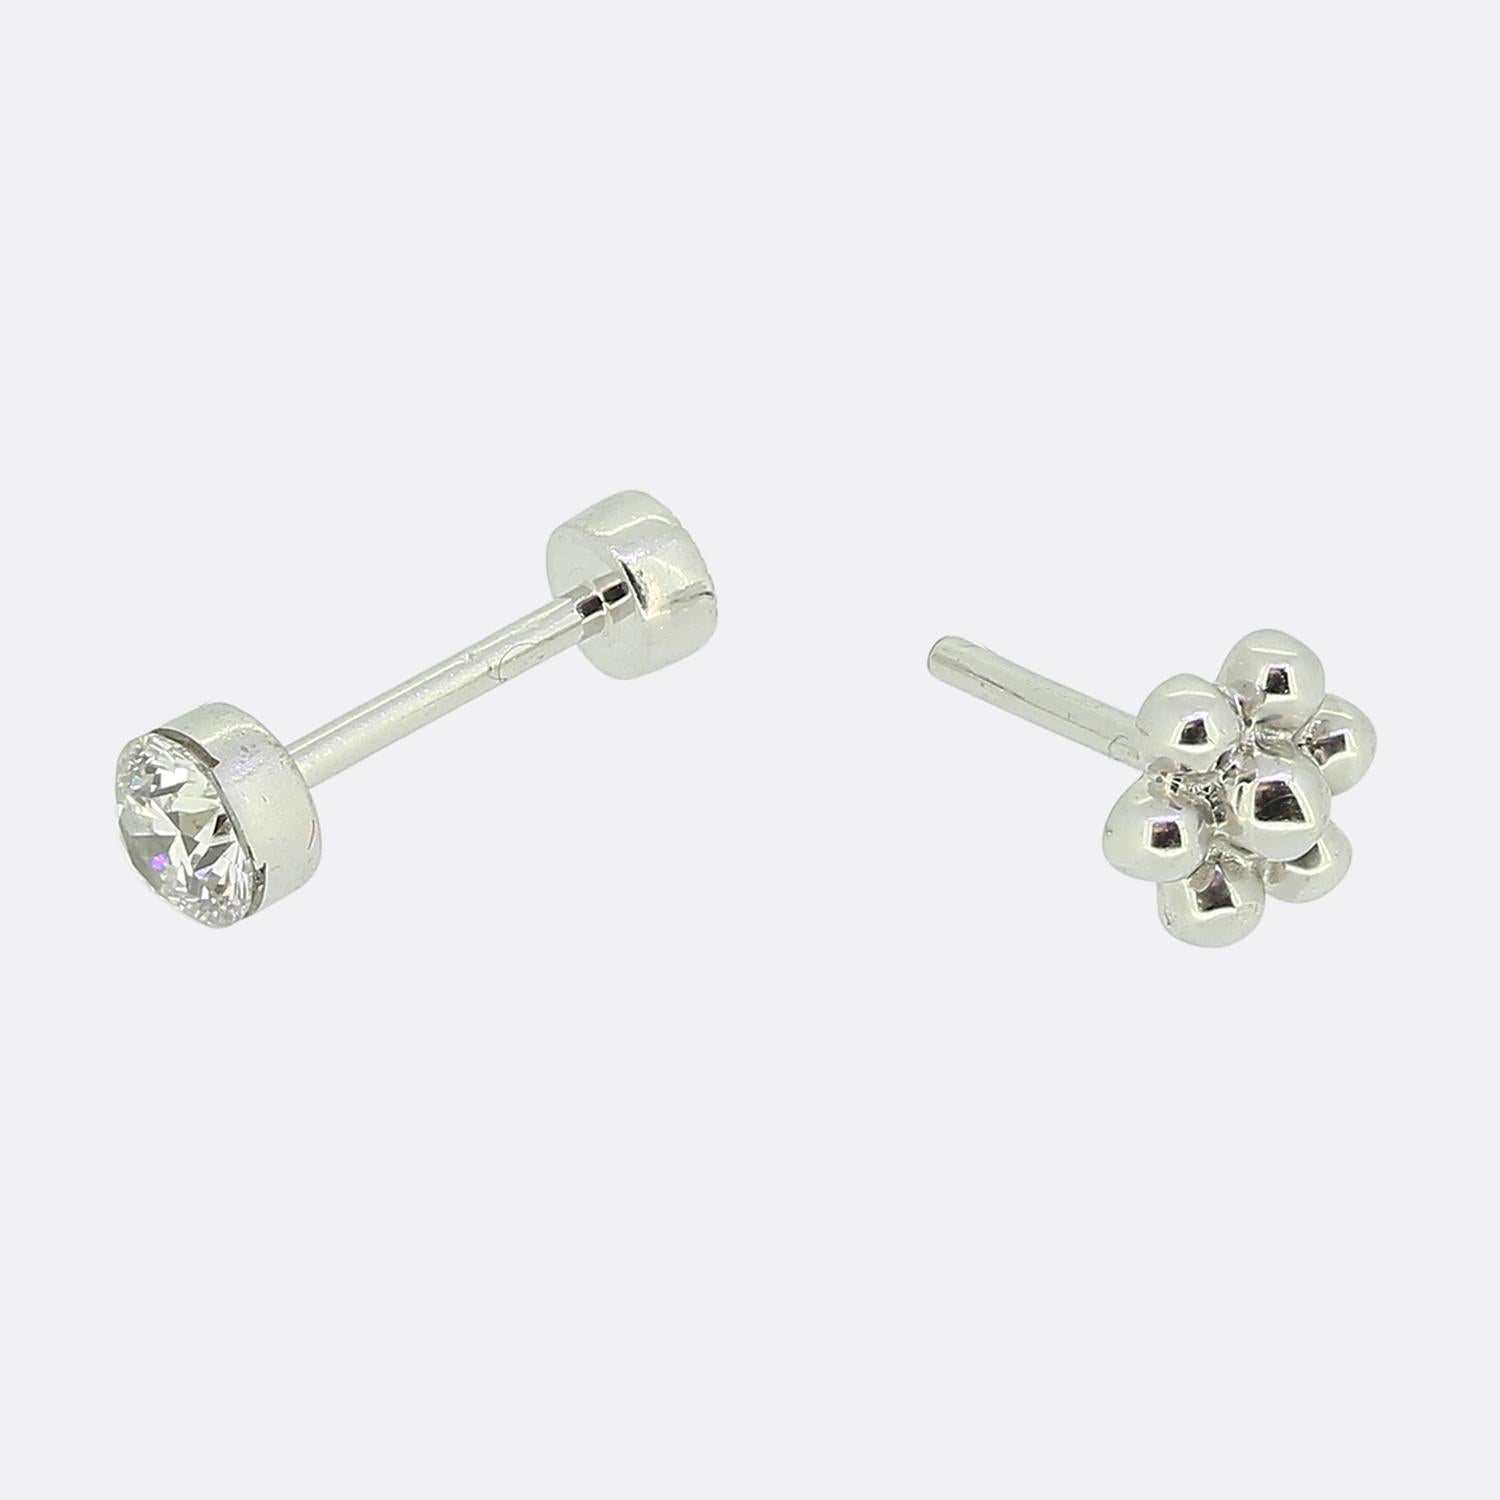 Round Cut Maria Tash 4mm Invisible Diamond Threaded Stud Earring with Diamond Back For Sale